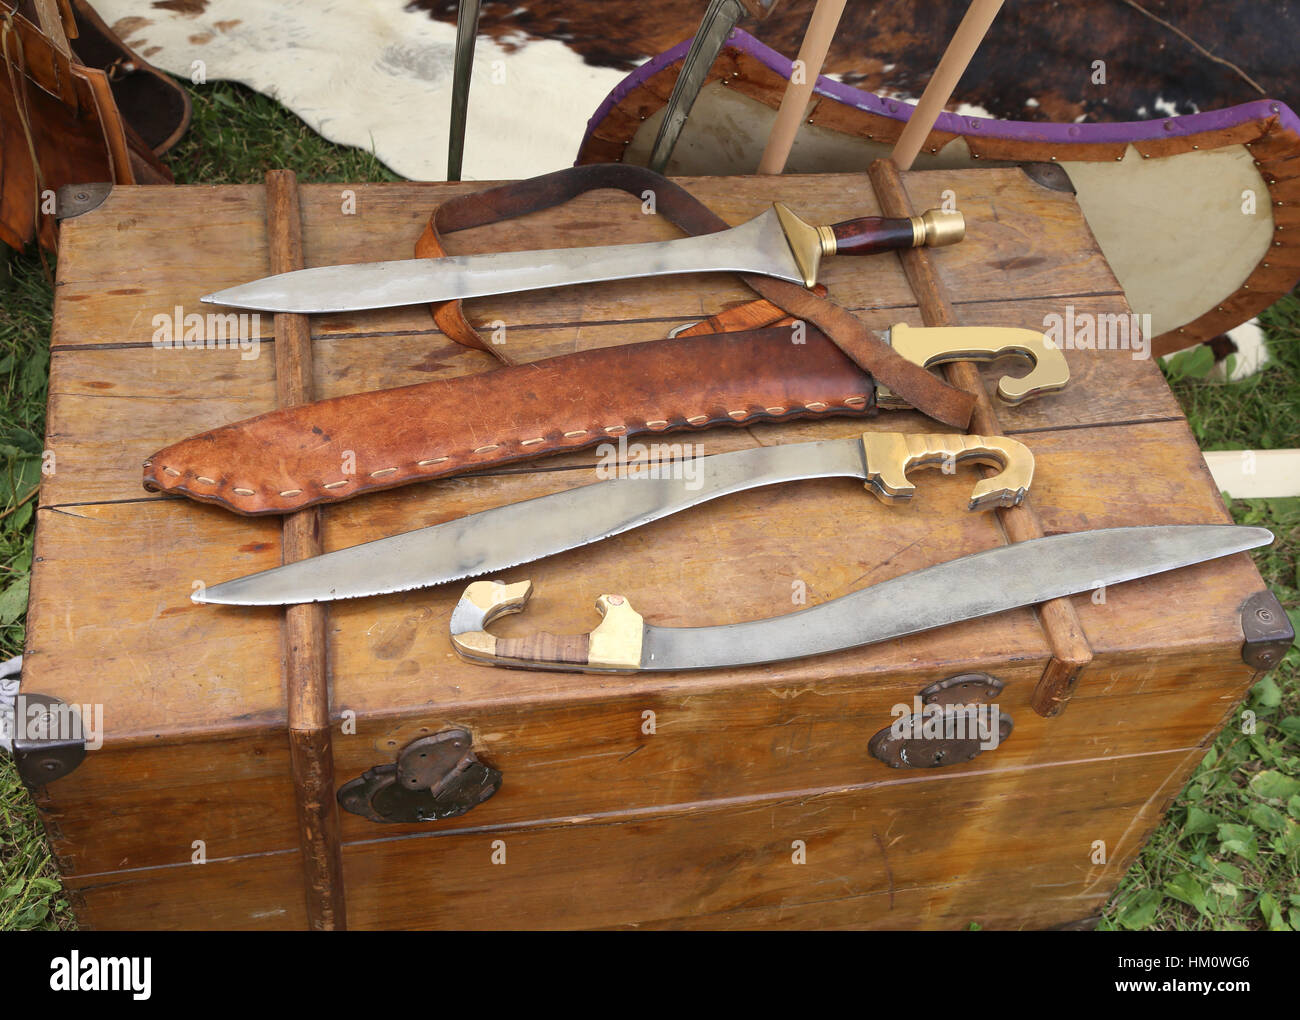 Ancient weapons knives swords medieval or Roman Stock Photo